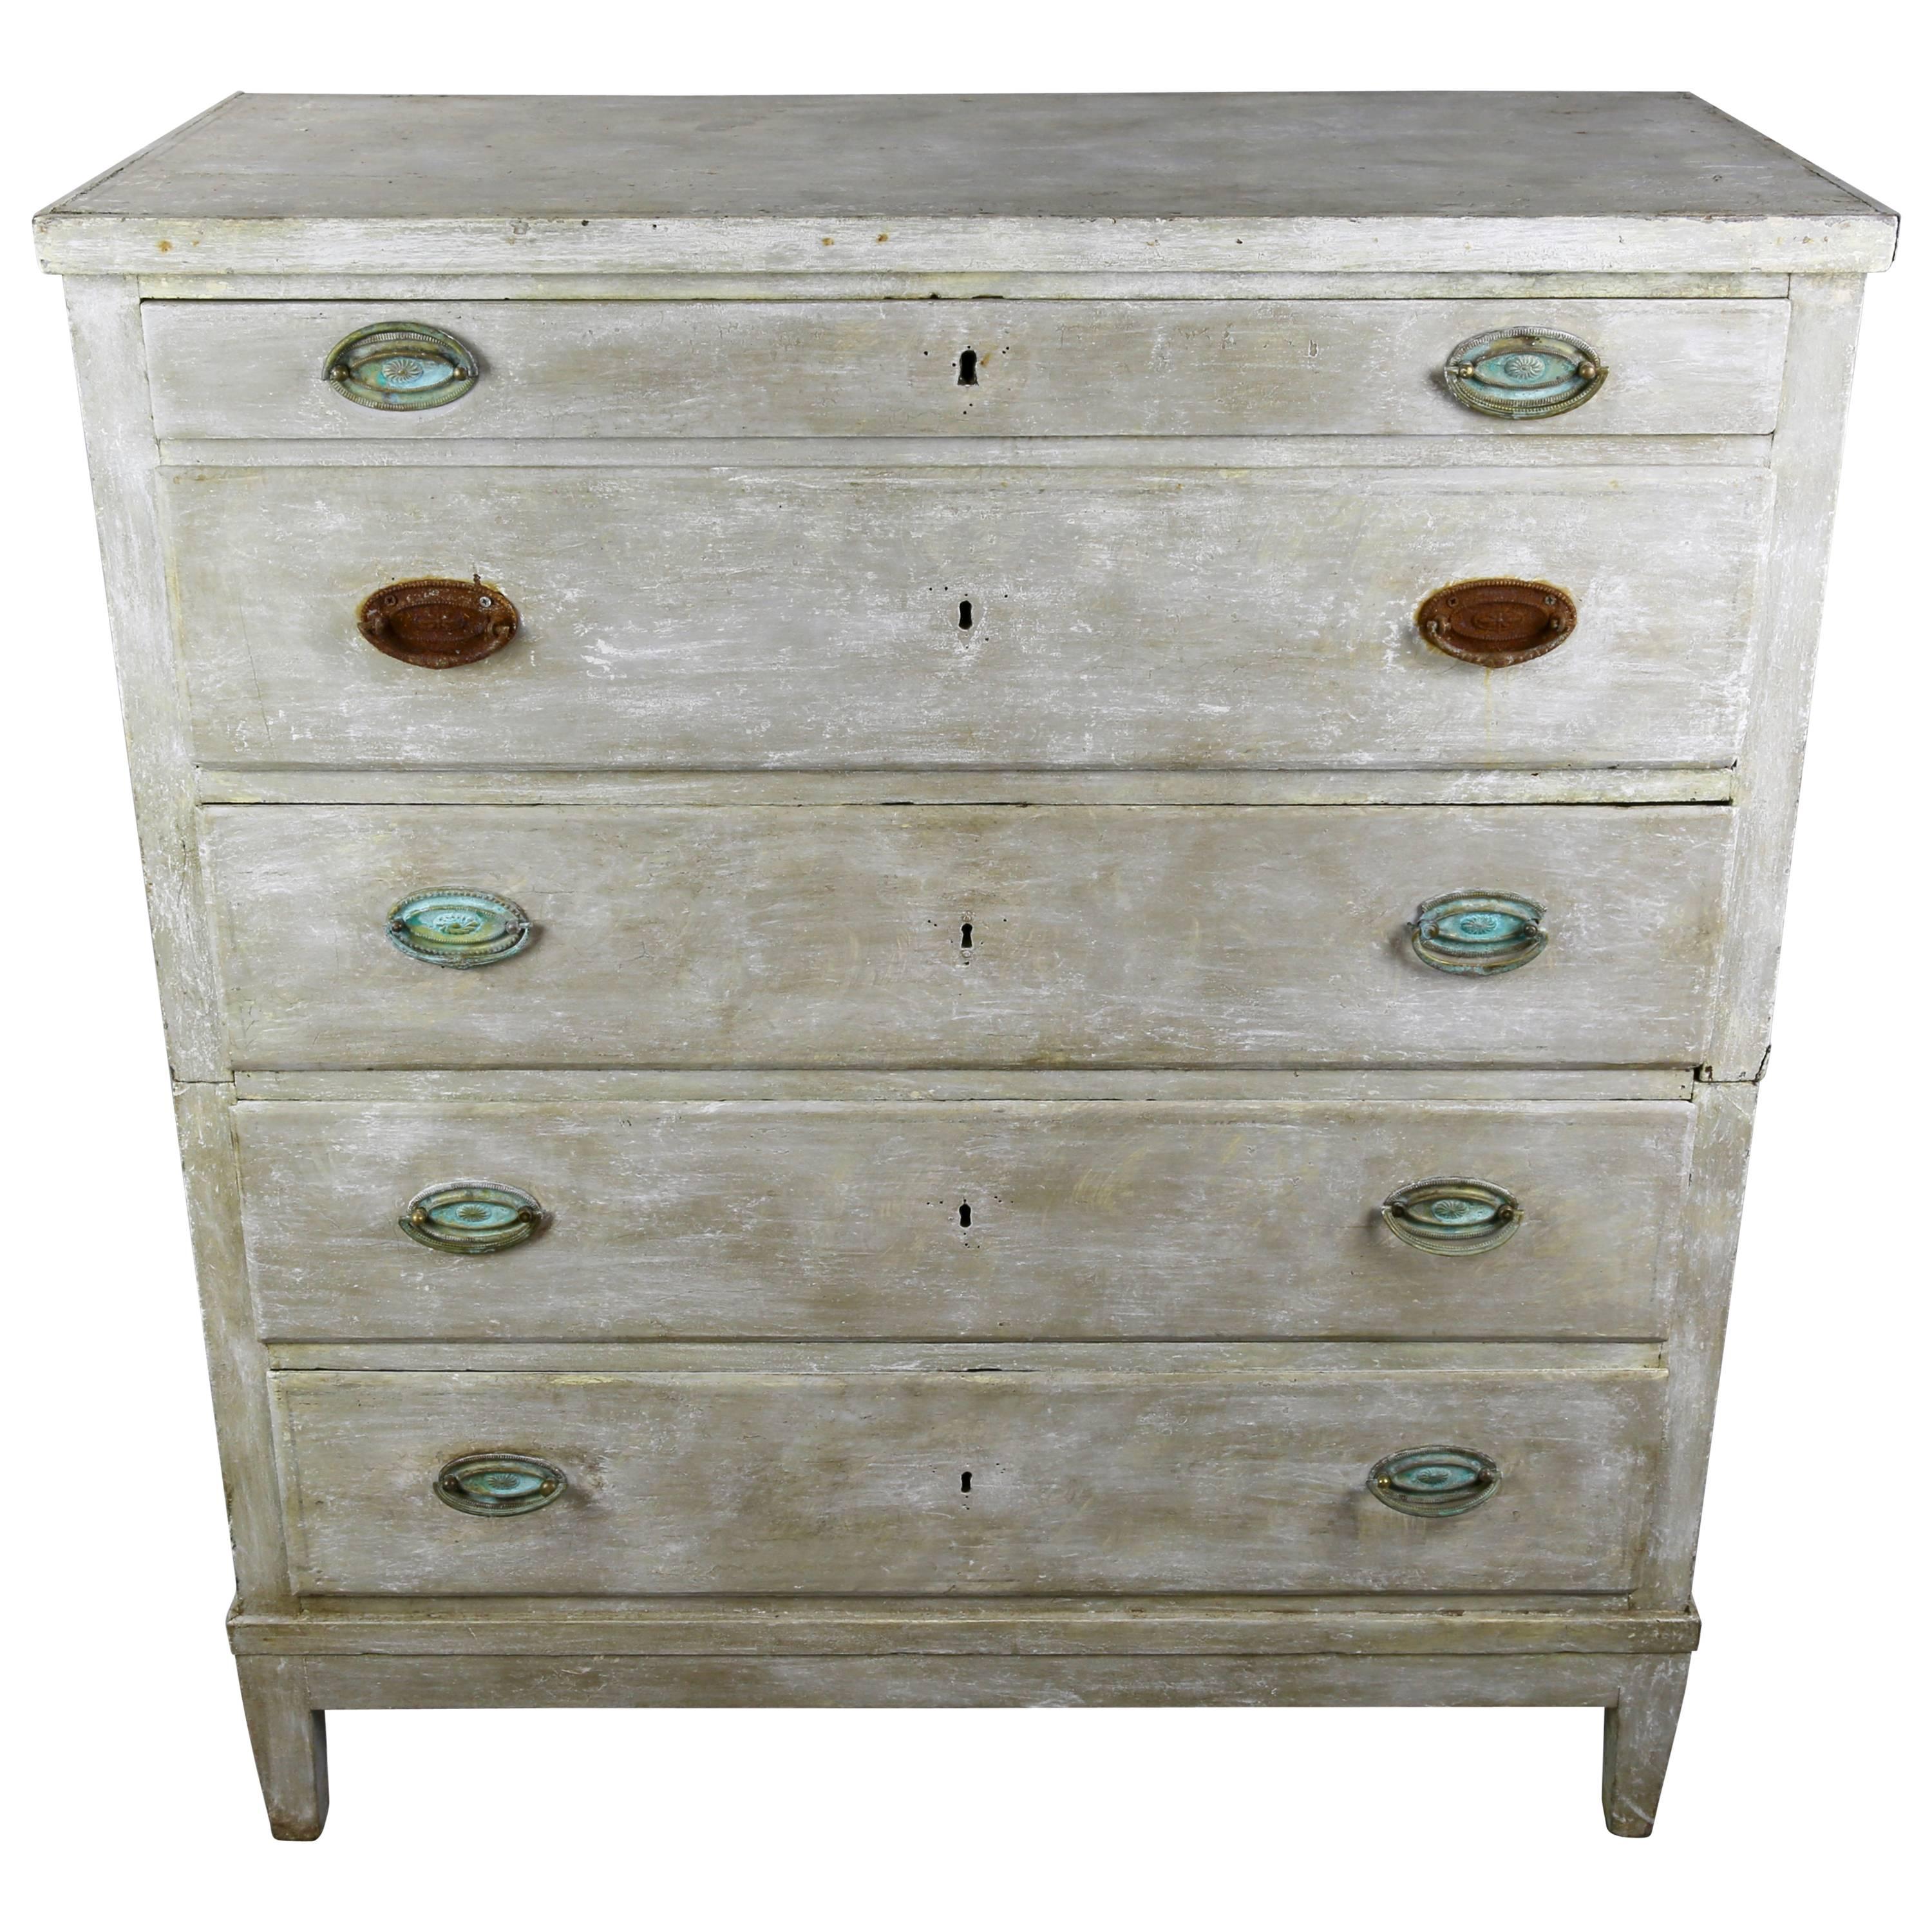 19th Century Provincial Grey Painted Swedish Chest of Drawers For Sale